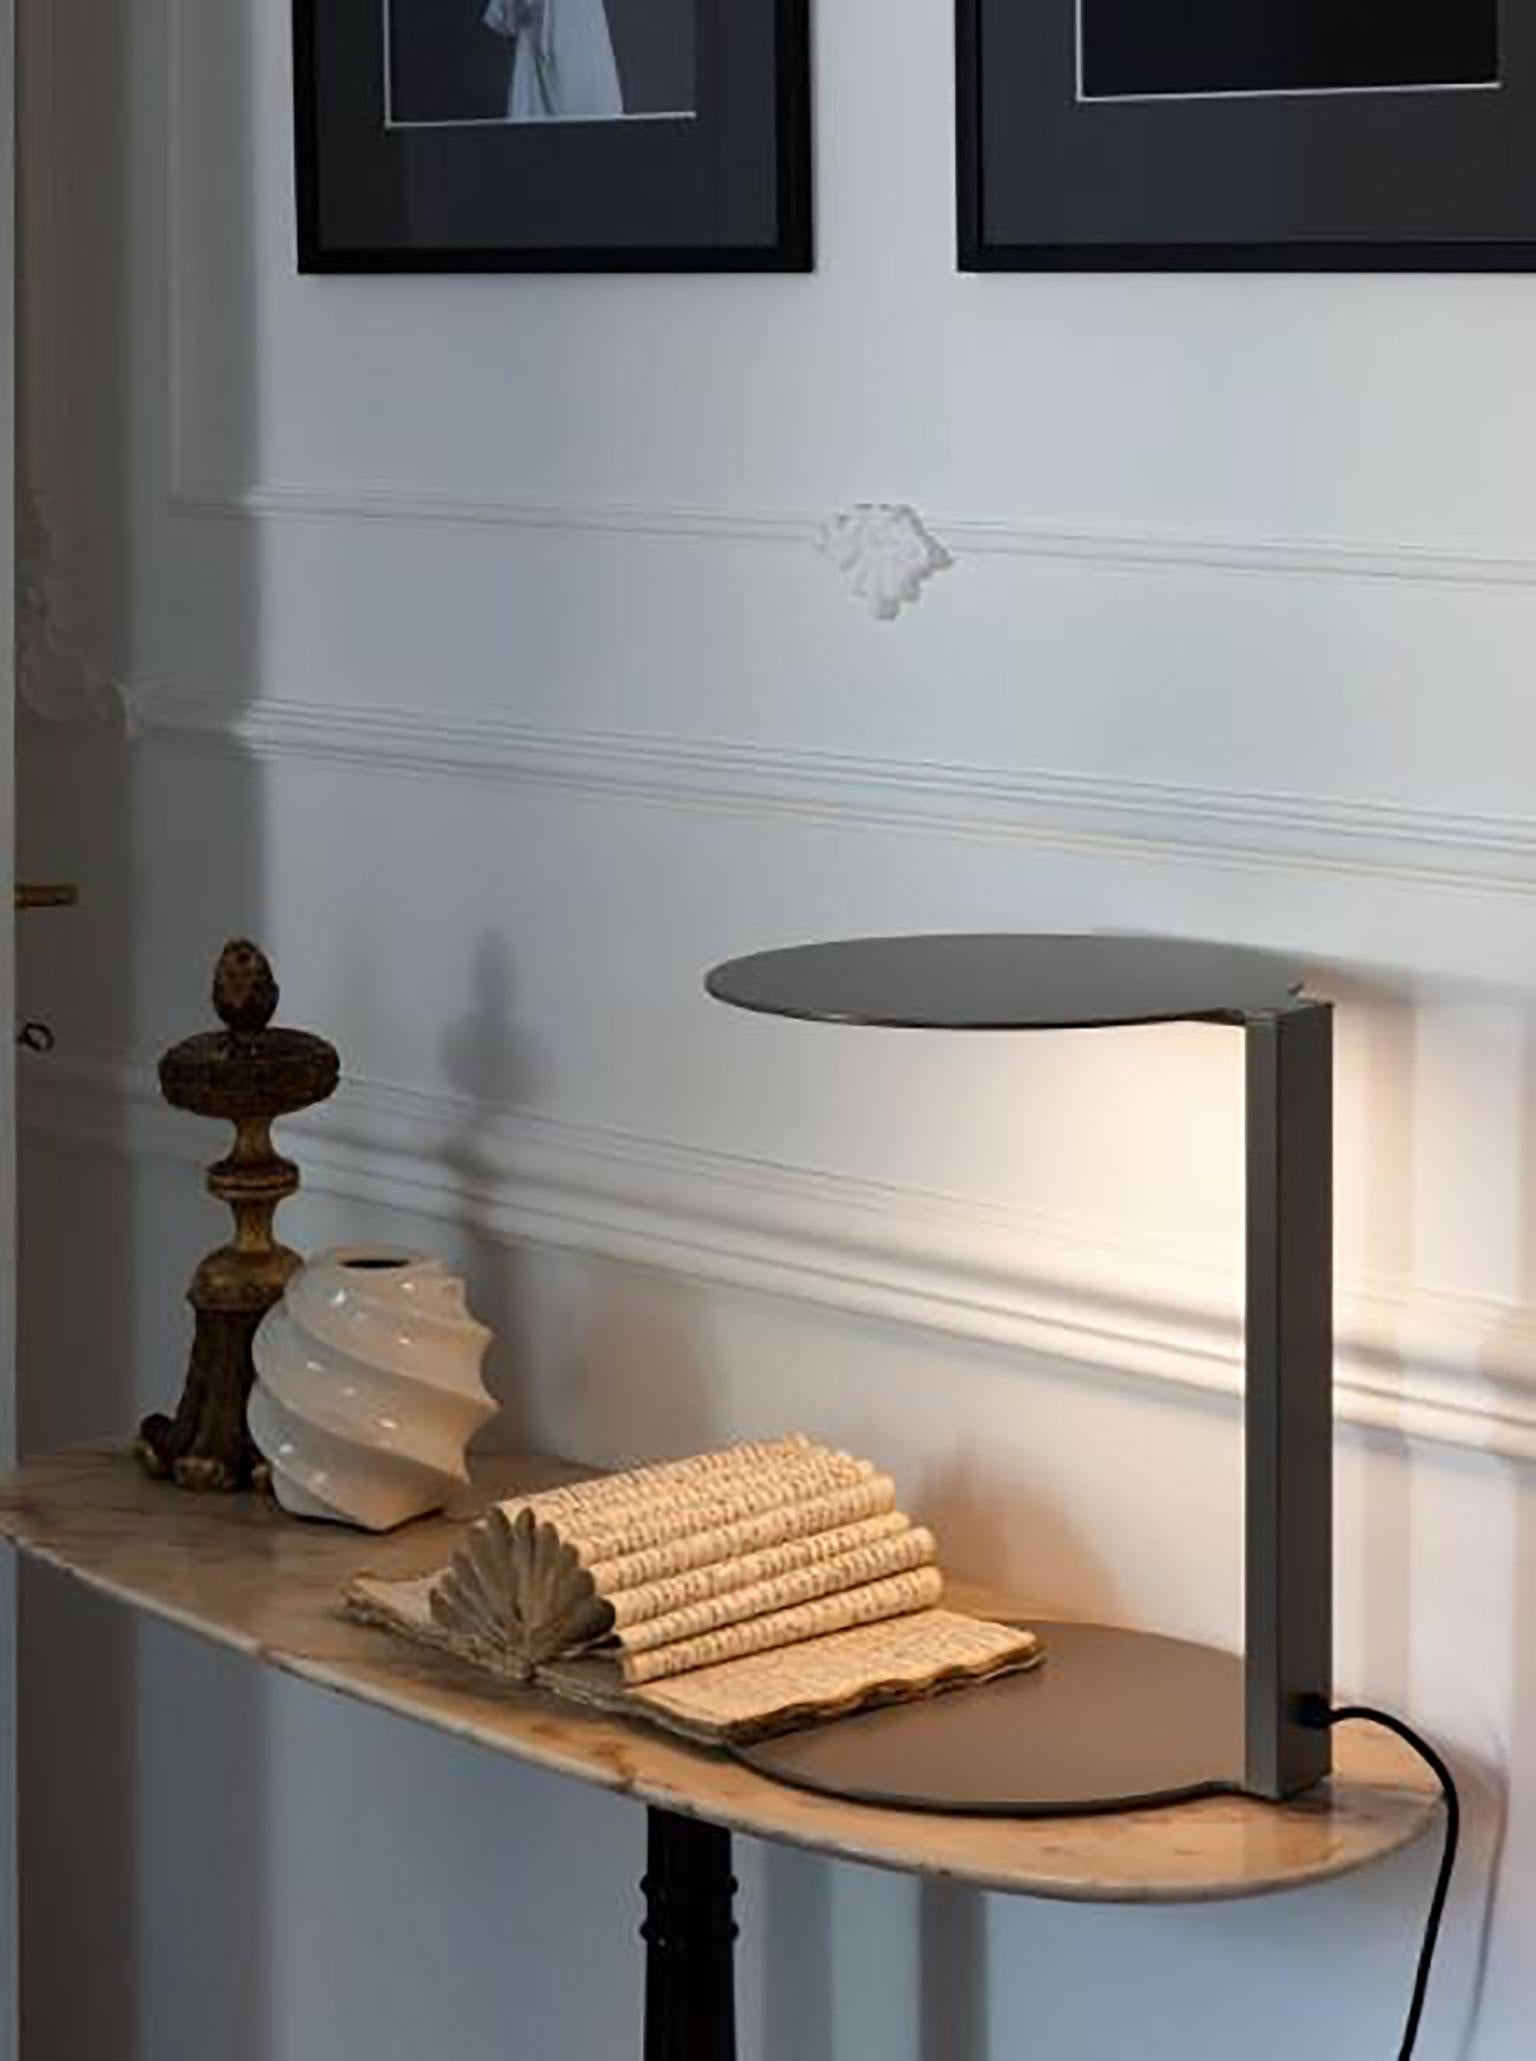 Duca table lamp designed by Nicola Gallizia for Oluce. This lamp is a great example of a unique, modern, and practical design which could be the perfect bedside table lamp. Its light is cast downwards which is preferred for a side table lamp,